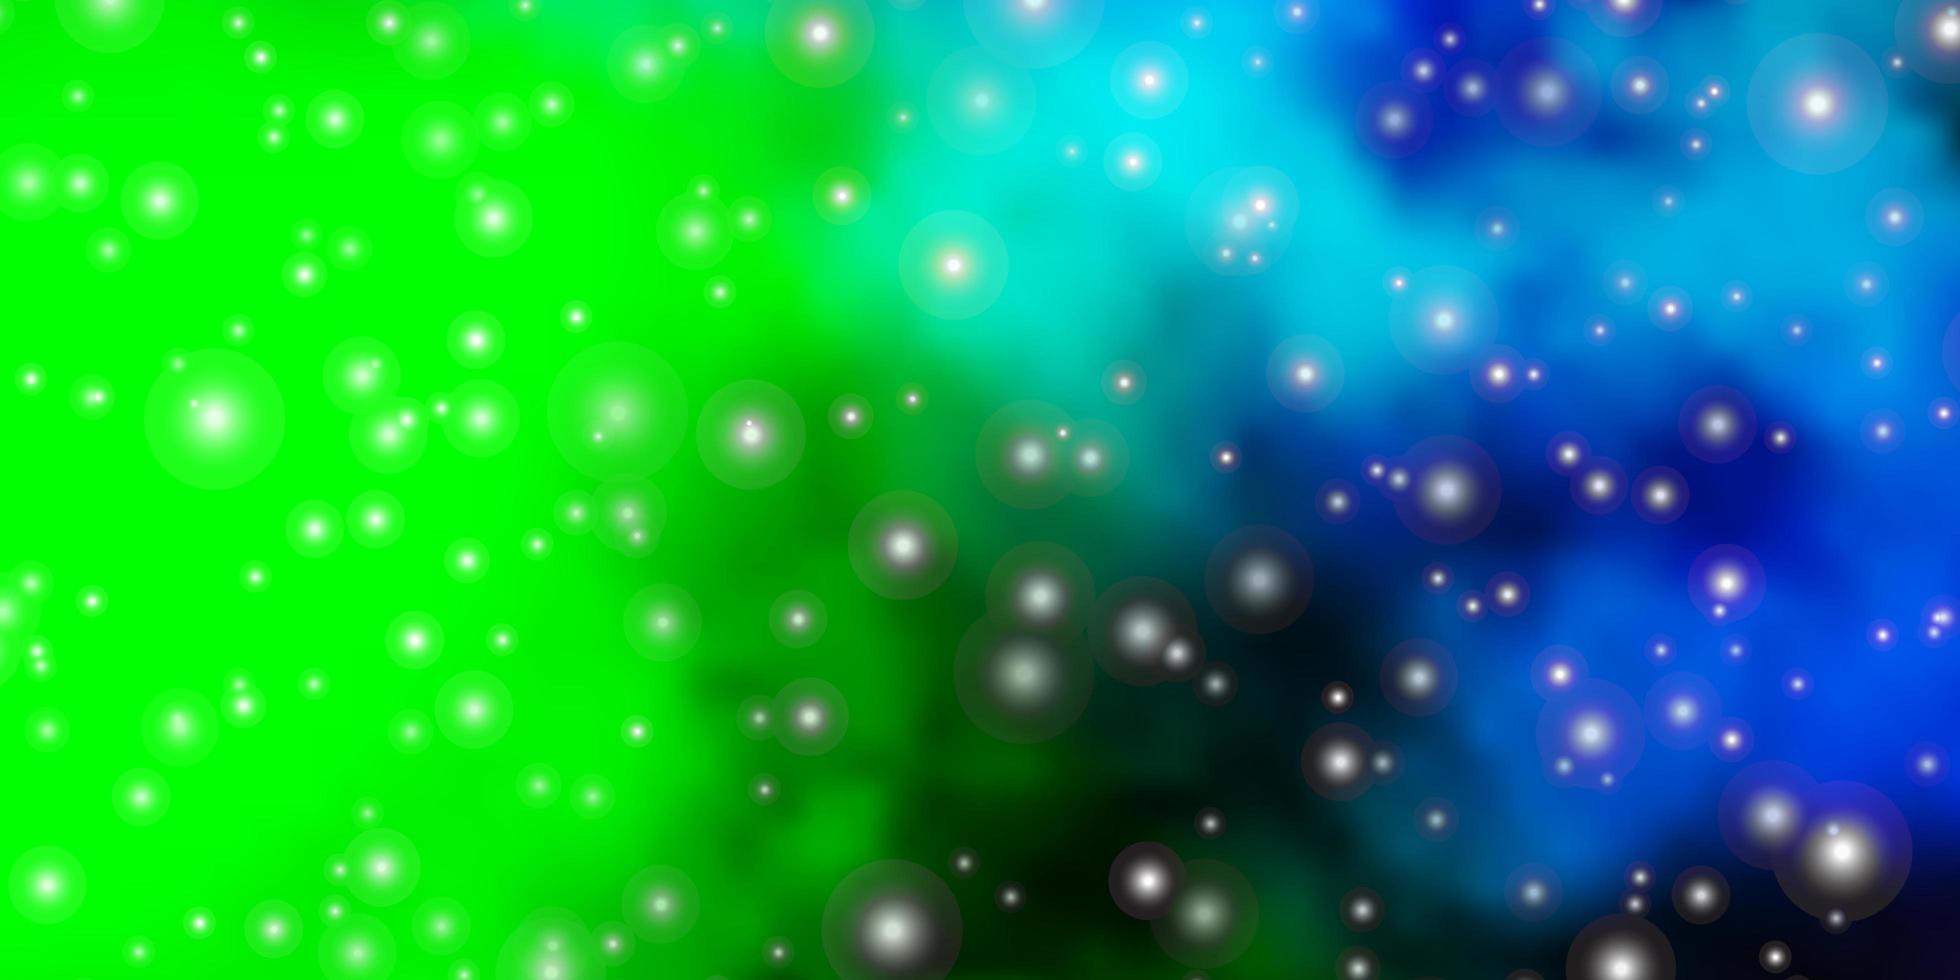 Light Blue, Green vector background with colorful stars.